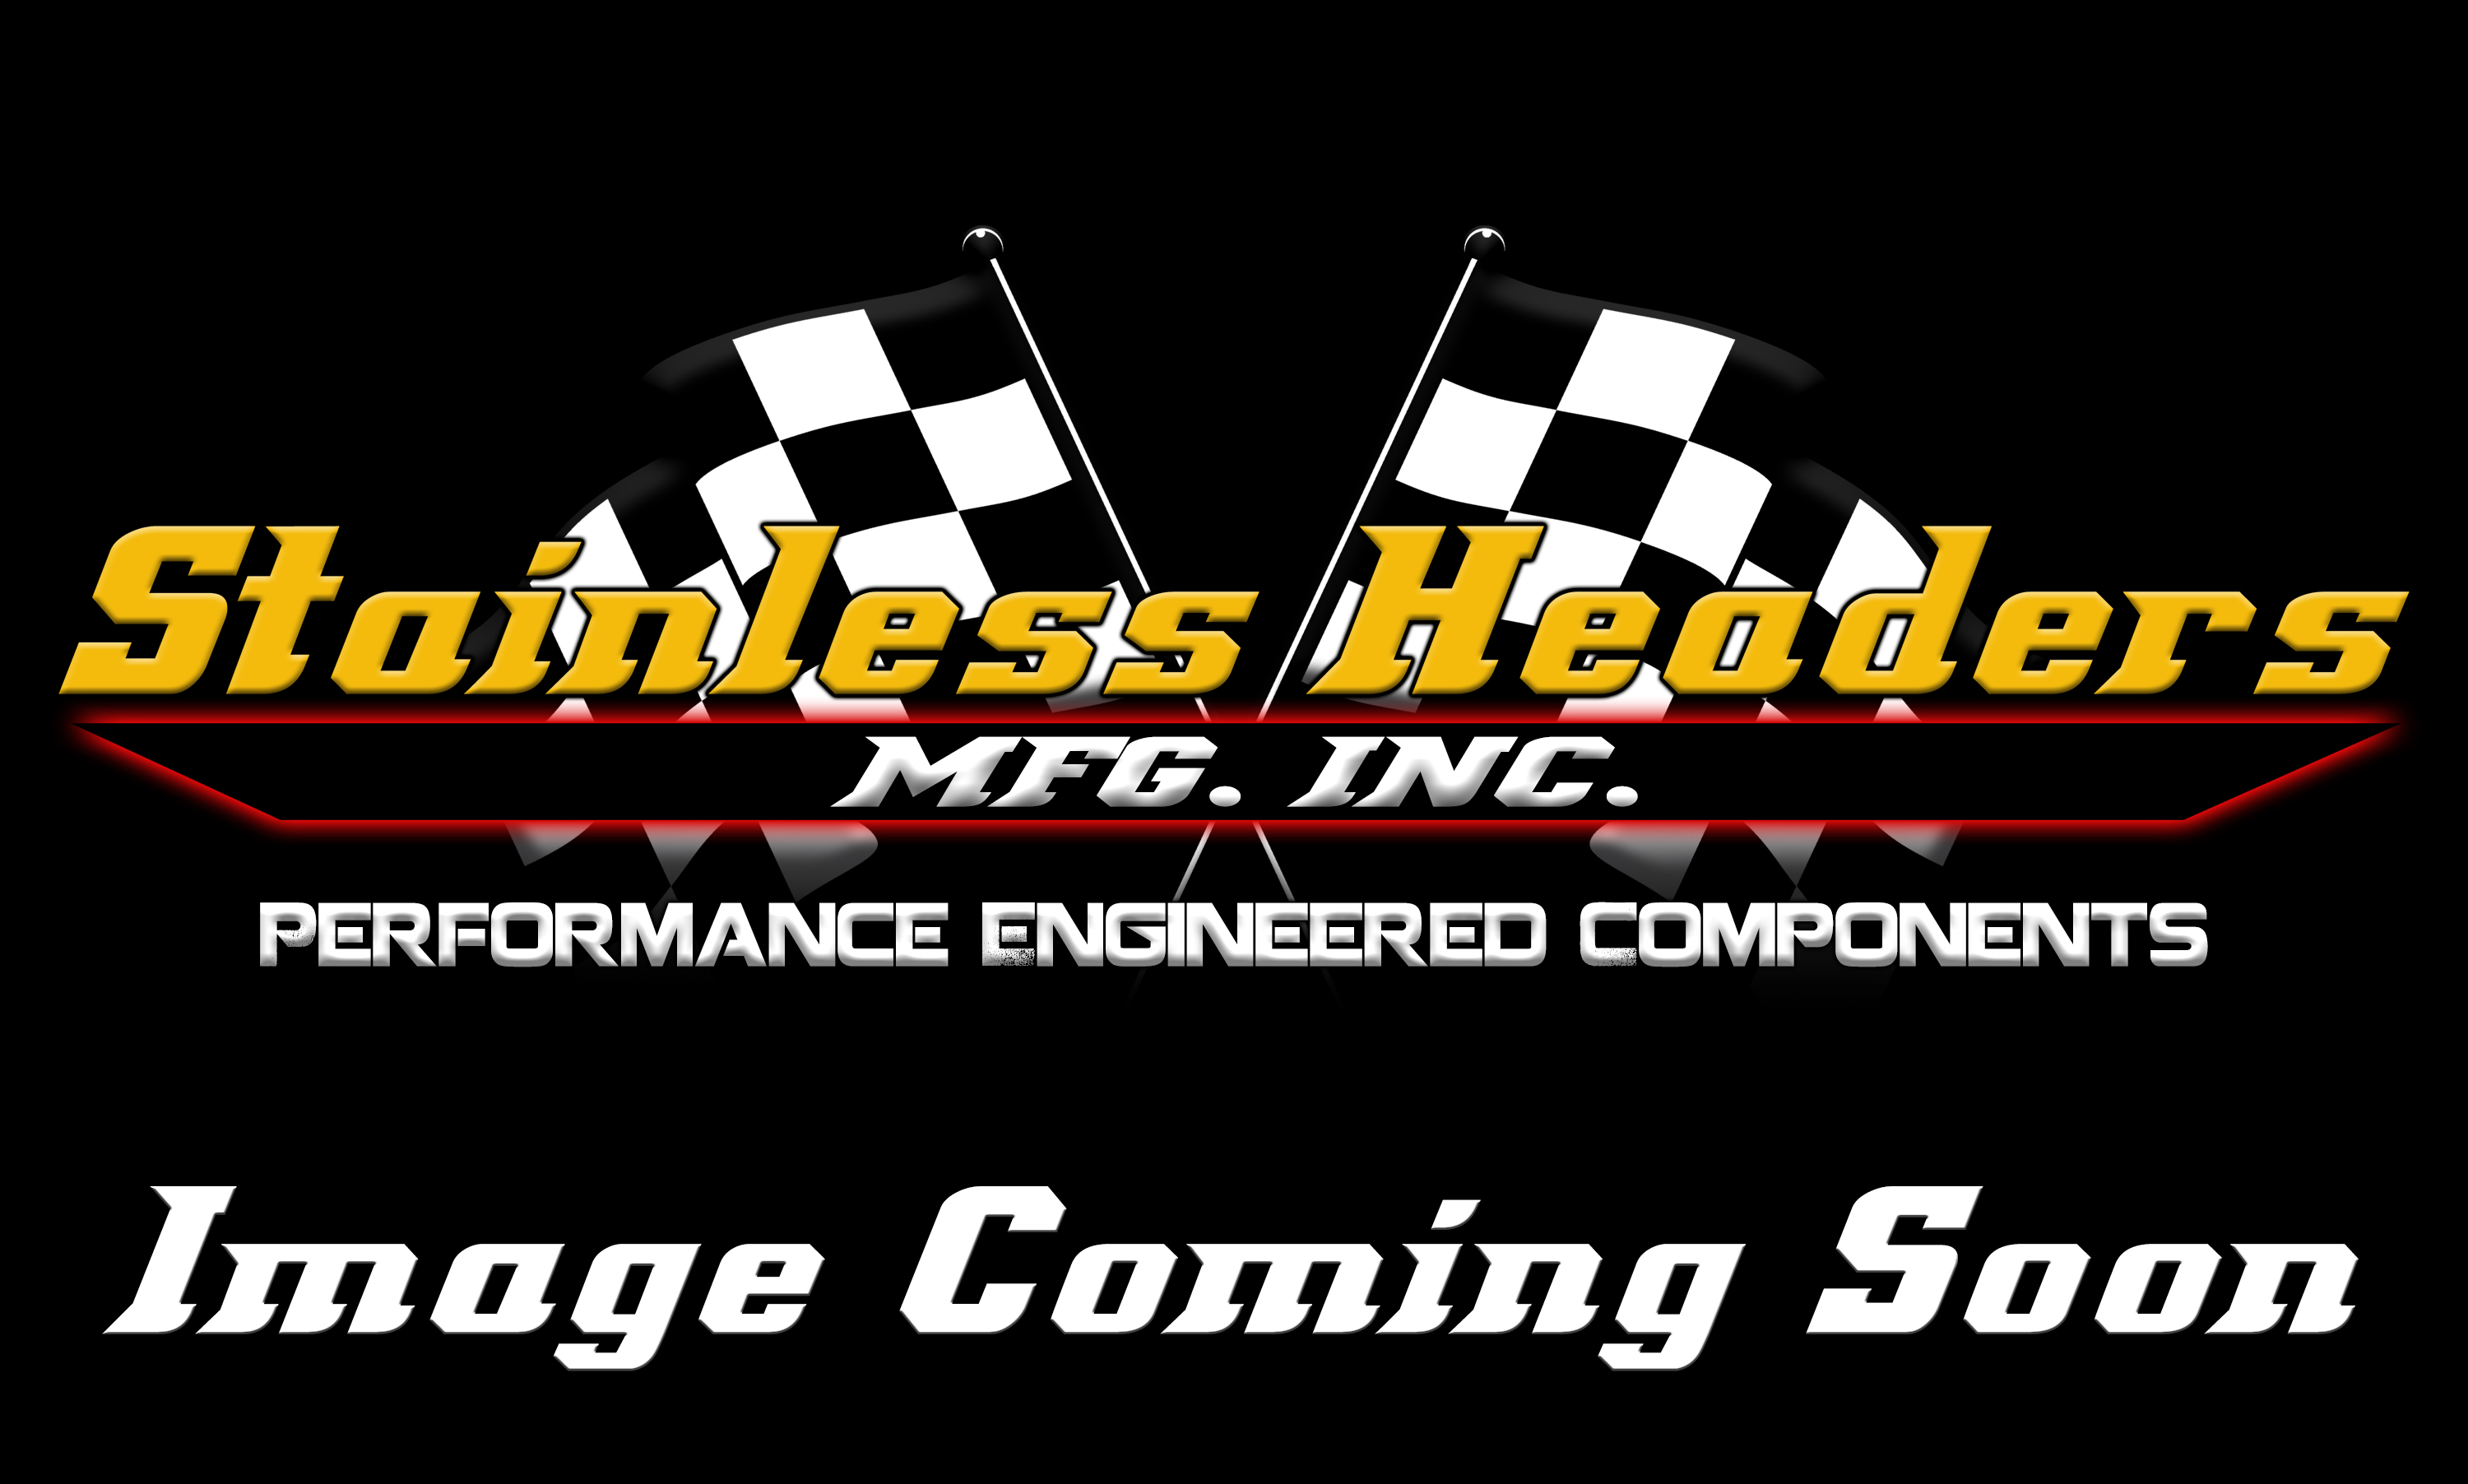 Stainless Headers - 2 1/8" Primary 4 into 1 Performance Merge Collector-16ga 321ss - Image 2